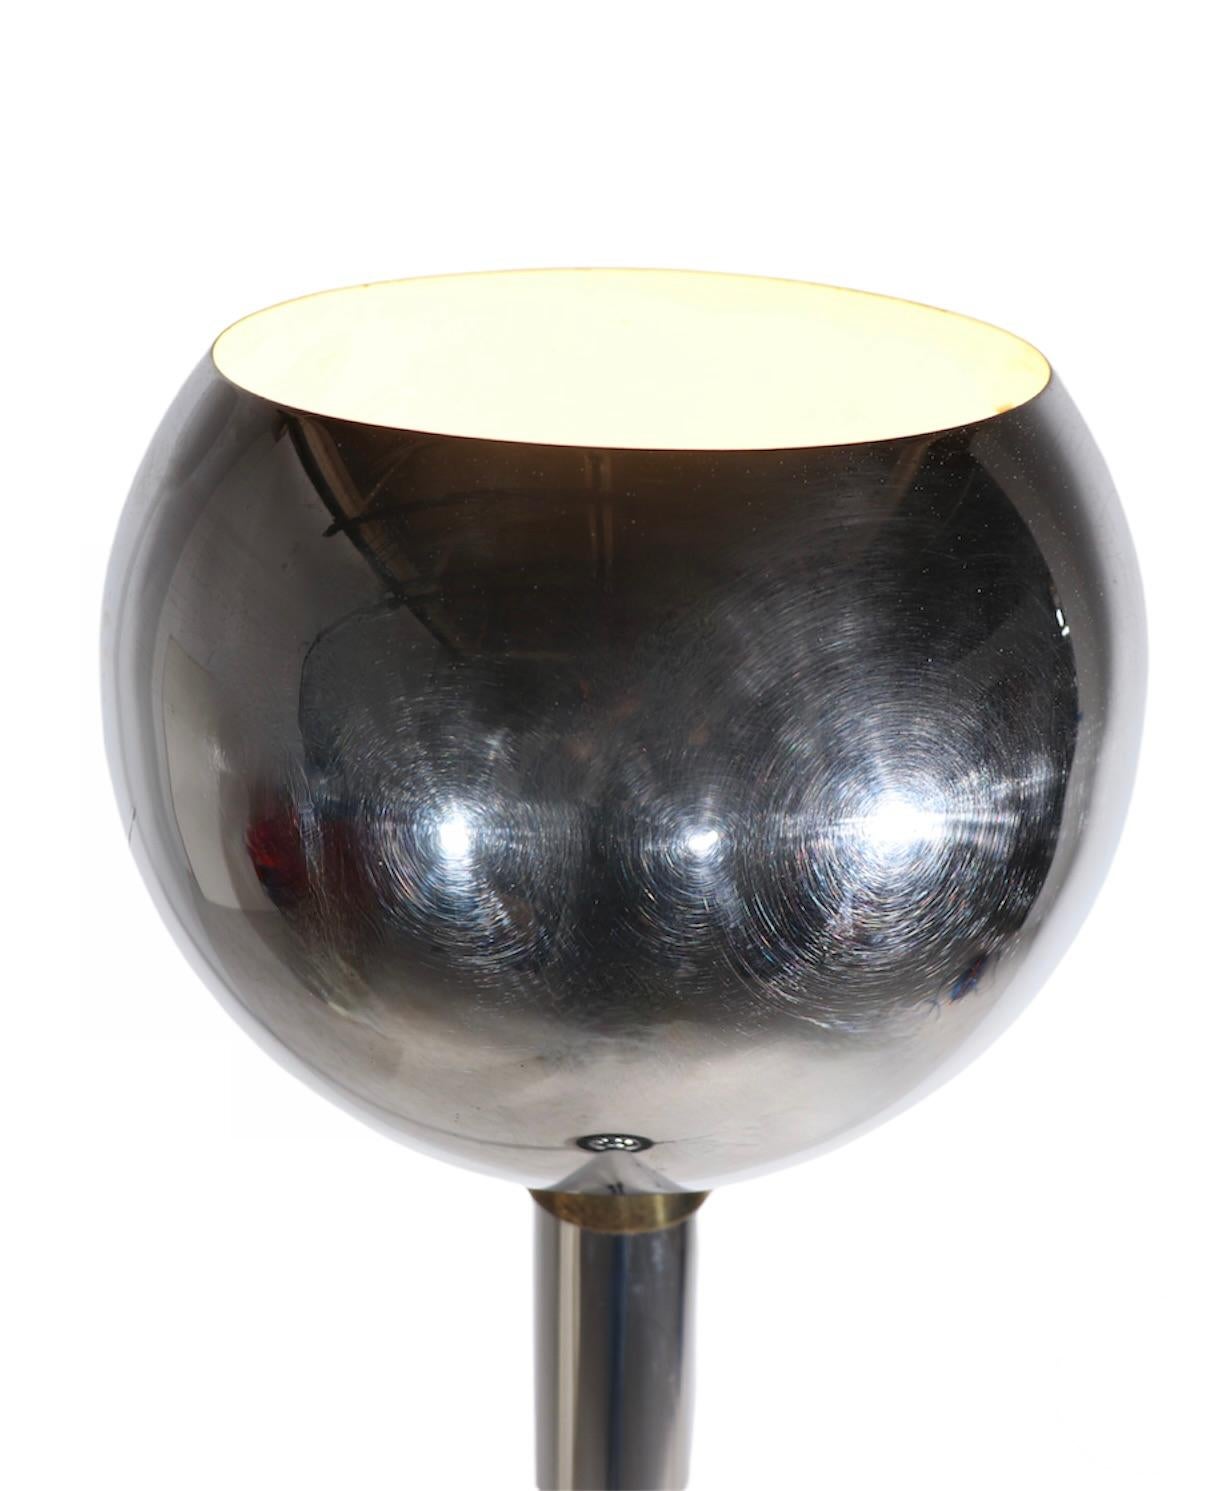 Brass Art Deco Machine Age Chrome and Black Torchiere Uplight Floor Lamp, Ca. 1930's For Sale